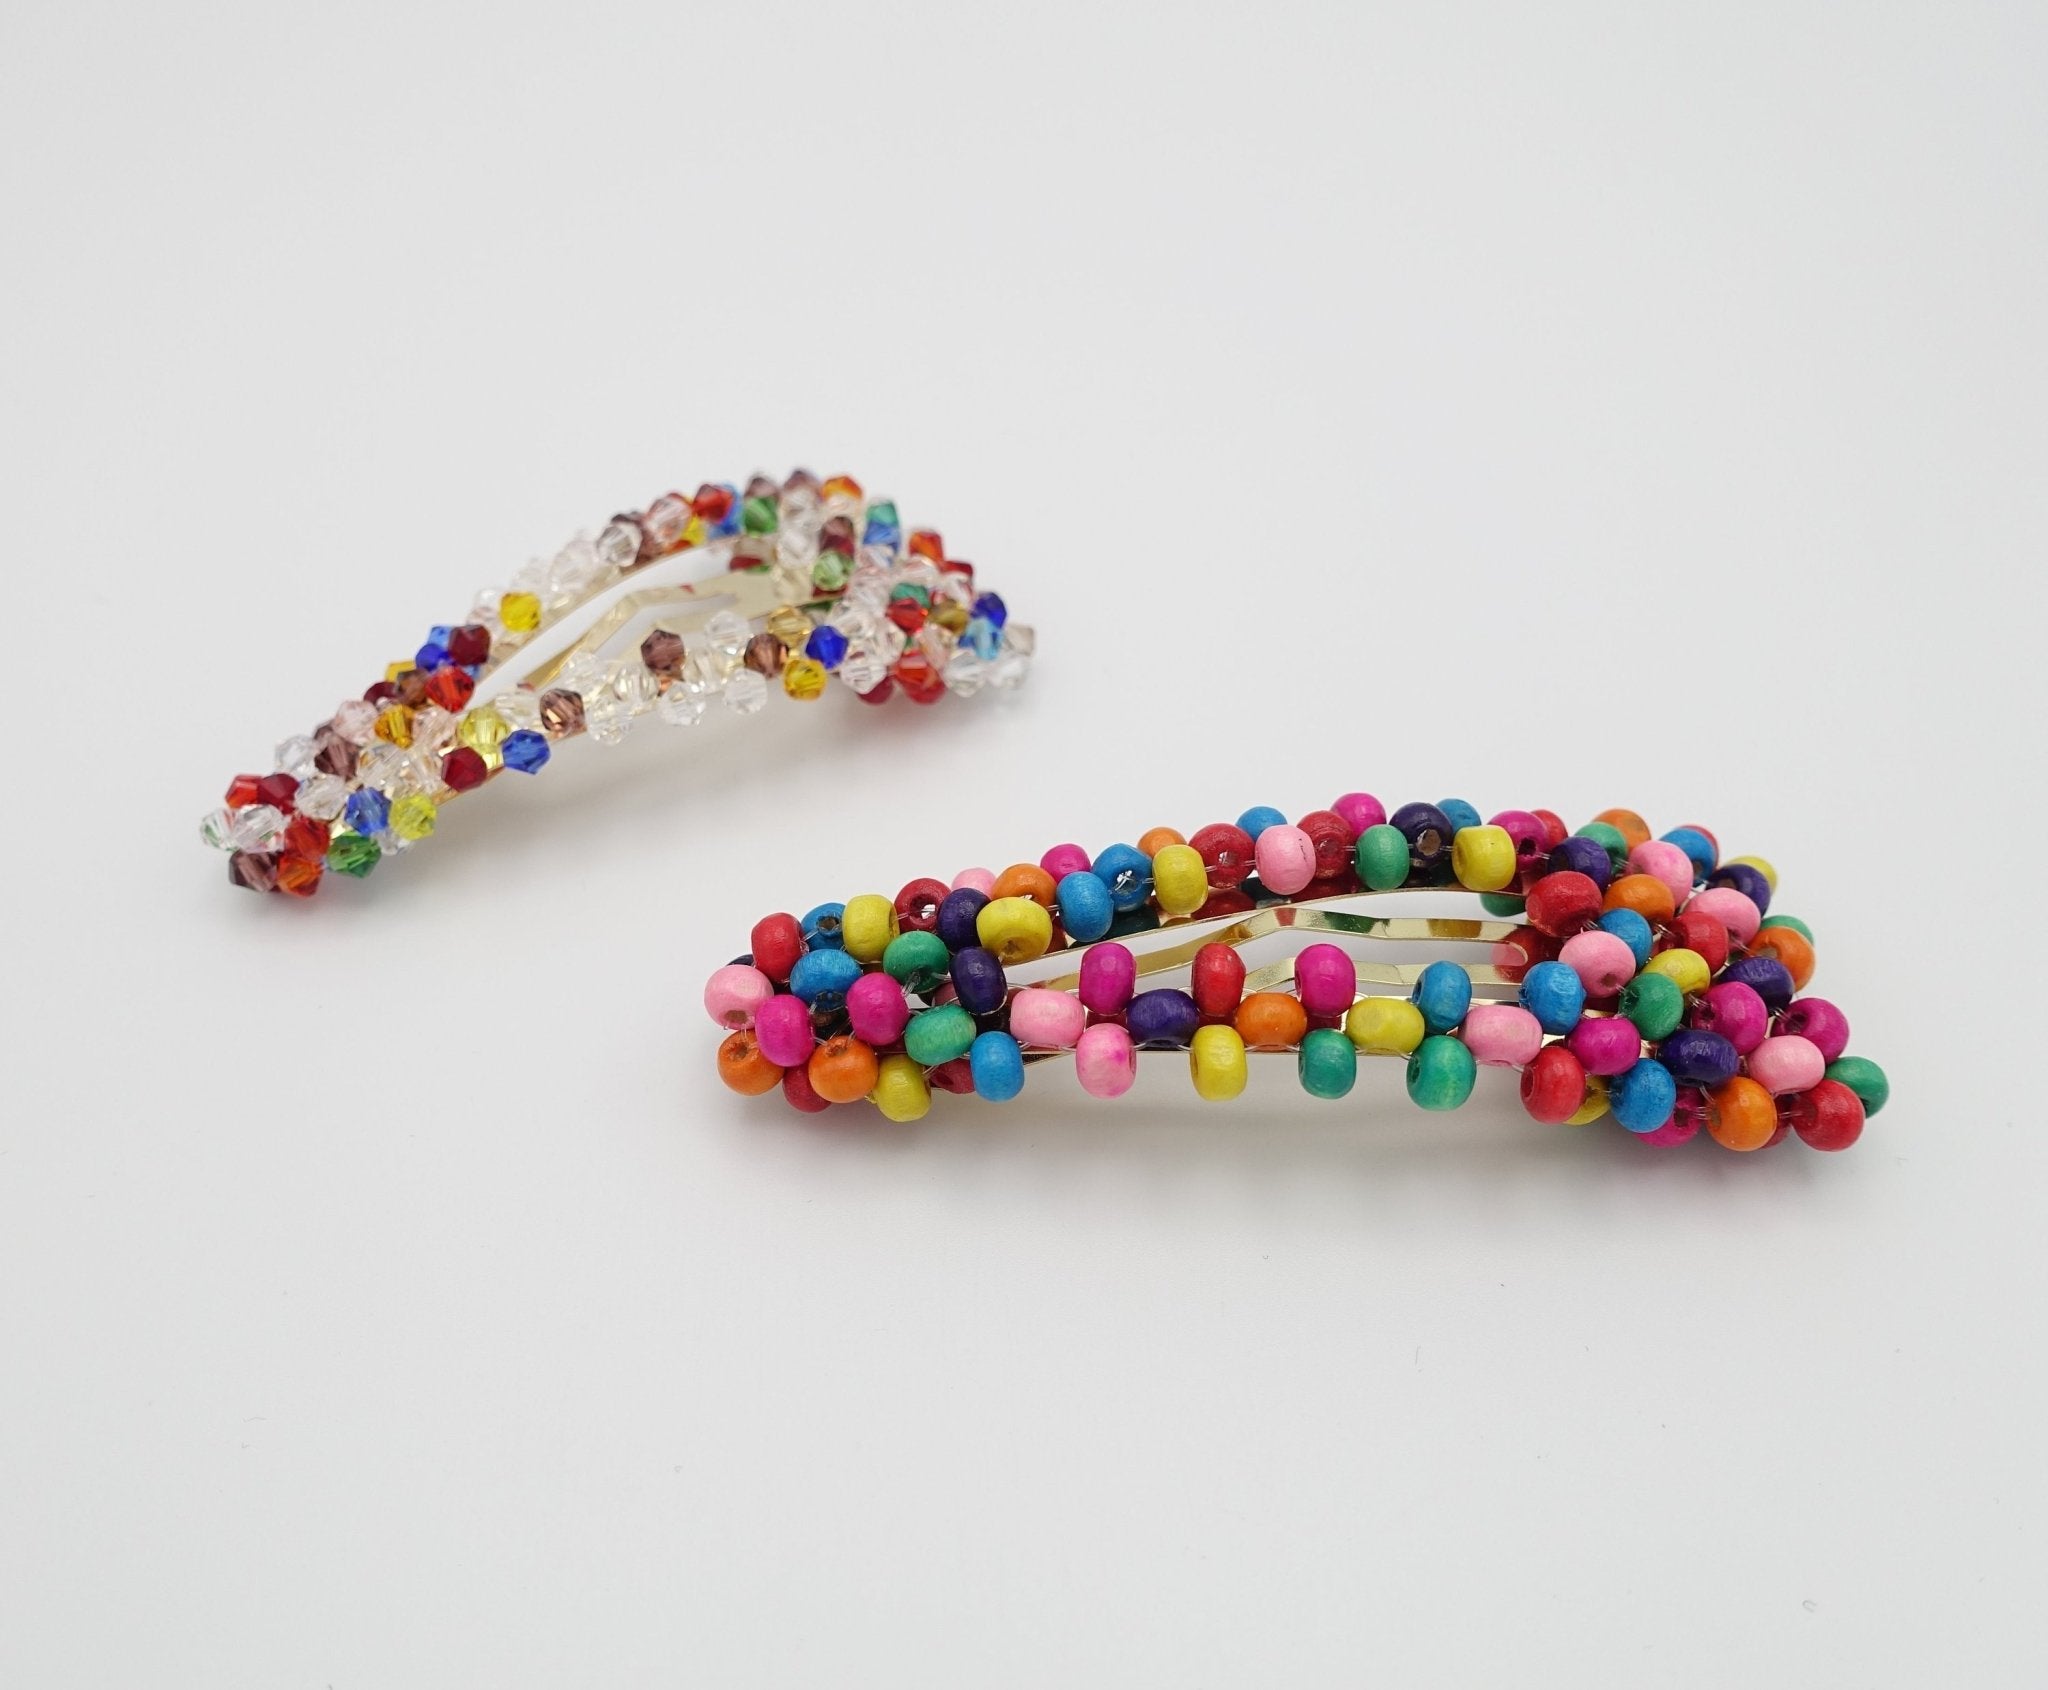 veryshine.com Accessories rainbow crystal beaded snap clip wood embellished hair clip woman hair accessory